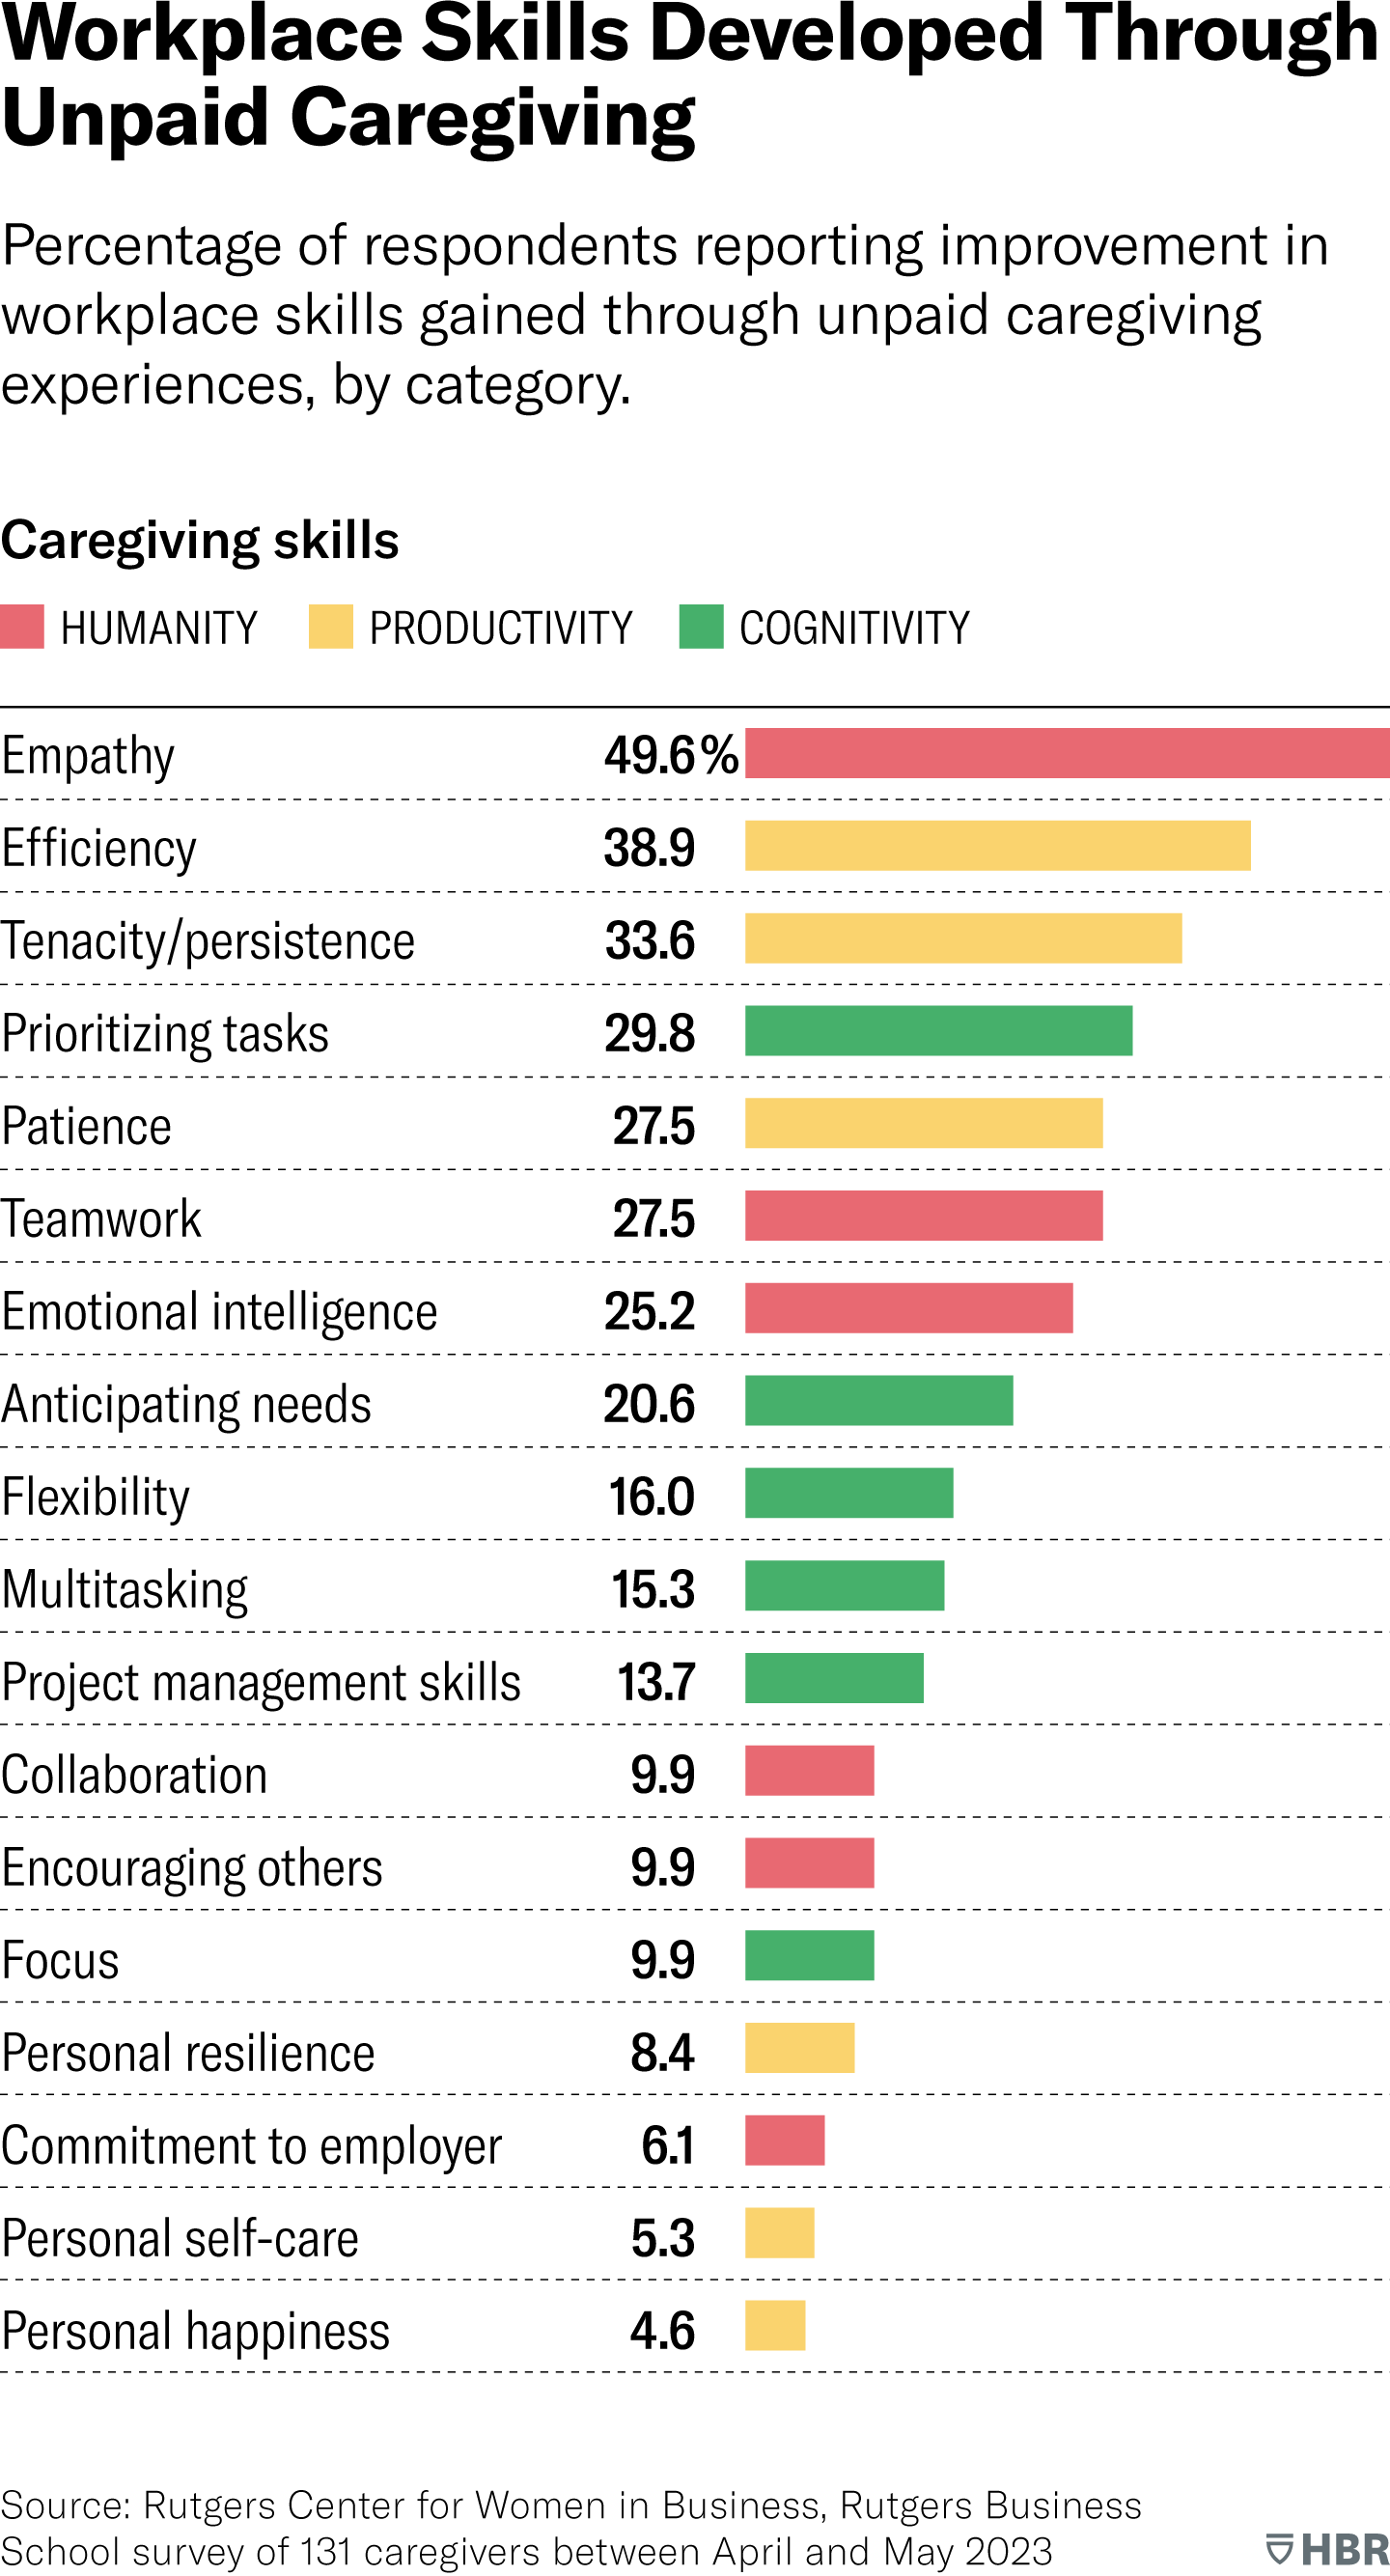 ALT-TEXT: This bar chart shows the percentage of respondents reporting improvement in specific workplace skills gained through unpaid caregiving experiences, and identifies the broader management skill category each one falls under. The categories are (humanity), (productivity), and (cognitivity).Empathy: 49.6% of respondents (humanity).<br />
Efficiency: 38.9% (productivity).<br />
Tenacity/persistence: 33.6% (productivity).<br />
Prioritizing tasks: 29.8% (cognitivity).<br />
Patience: 27.5% (humanity).<br />
Teamwork: 27.5% (productivity).<br />
Emotional intelligence: 25.2% (humanity).<br />
Anticipating needs: 20.6% (cognitivity).<br />
Flexibility: 16% (cognitivity).<br />
Multitasking: 15.3% (cognitivity).<br />
Project management skills: 13.7% (cognitivity).<br />
Encouraging others: 9.9% (humanity).<br />
Focus: 9.9% (cognitivity).<br />
Collaboration: 9.9% (humanity).<br />
Personal resilience: 8.4% (productivity).<br />
Commitment to employer: 6.1% (humanity).<br />
Personal self-care: 5.3% (productivity).<br />
Personal happiness: 4.6% (productivity).Source: Rutgers Center for Women in Business, Rutgers Business School survey of 131 caregivers between April and May 2023.<br />
